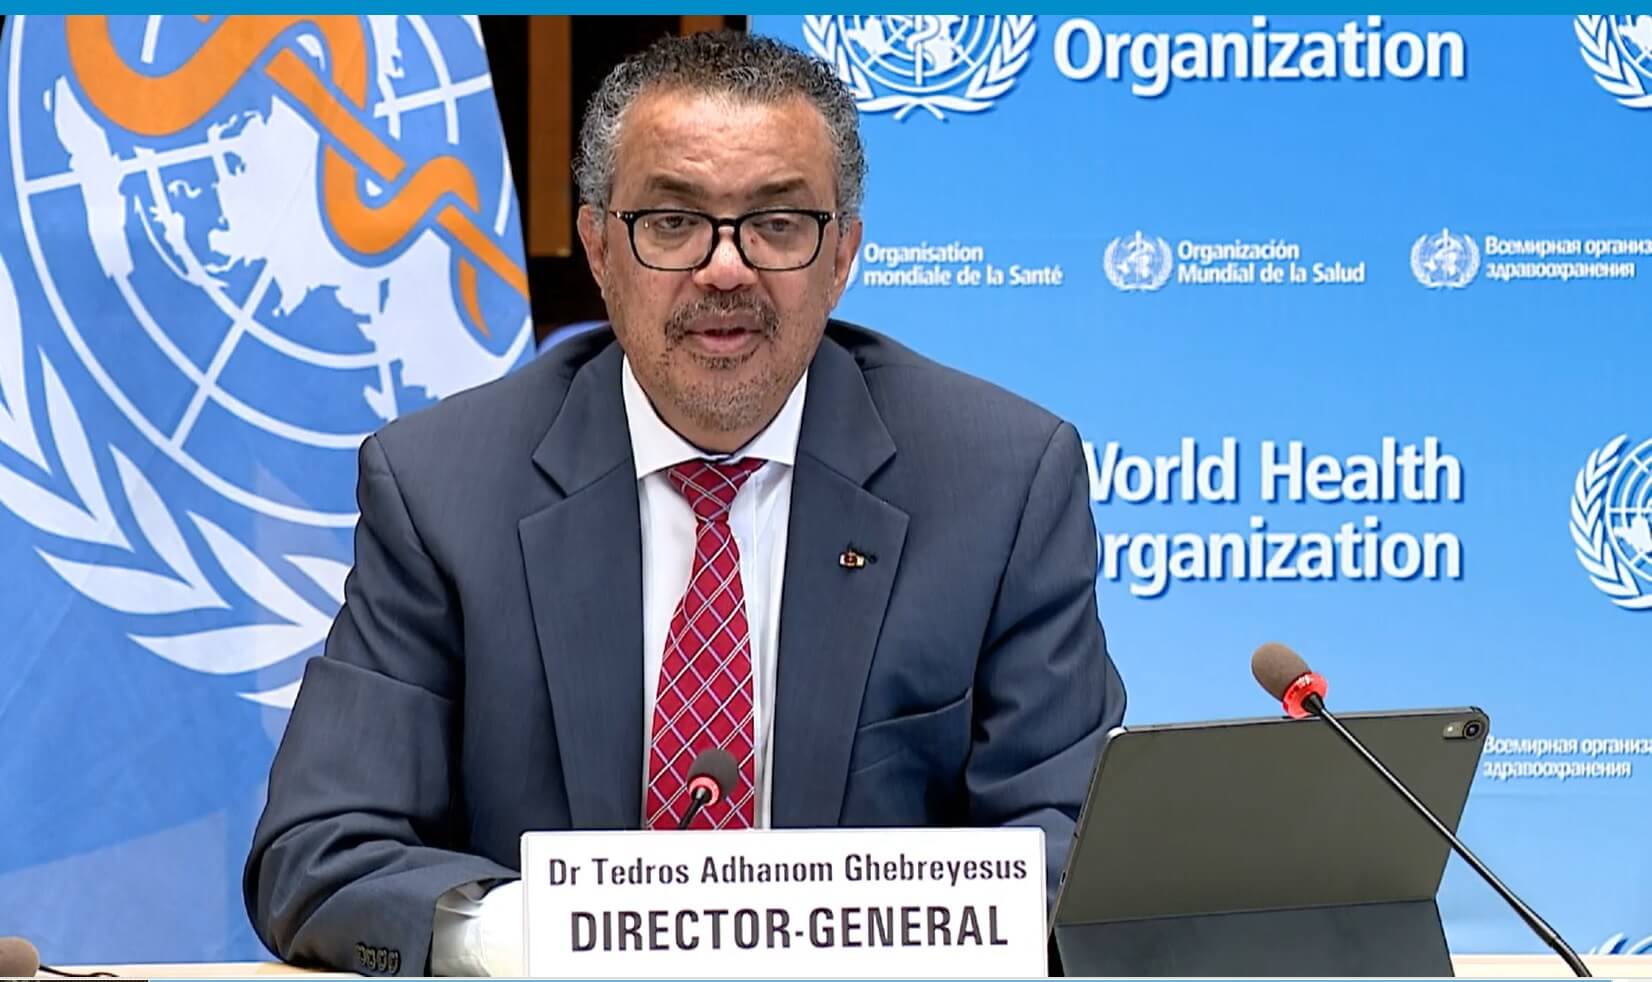 The Director General of the World Health Organization, Dr. Tedros Adhanom Ghebreyesus at a press conference. From the video on the agency's website.